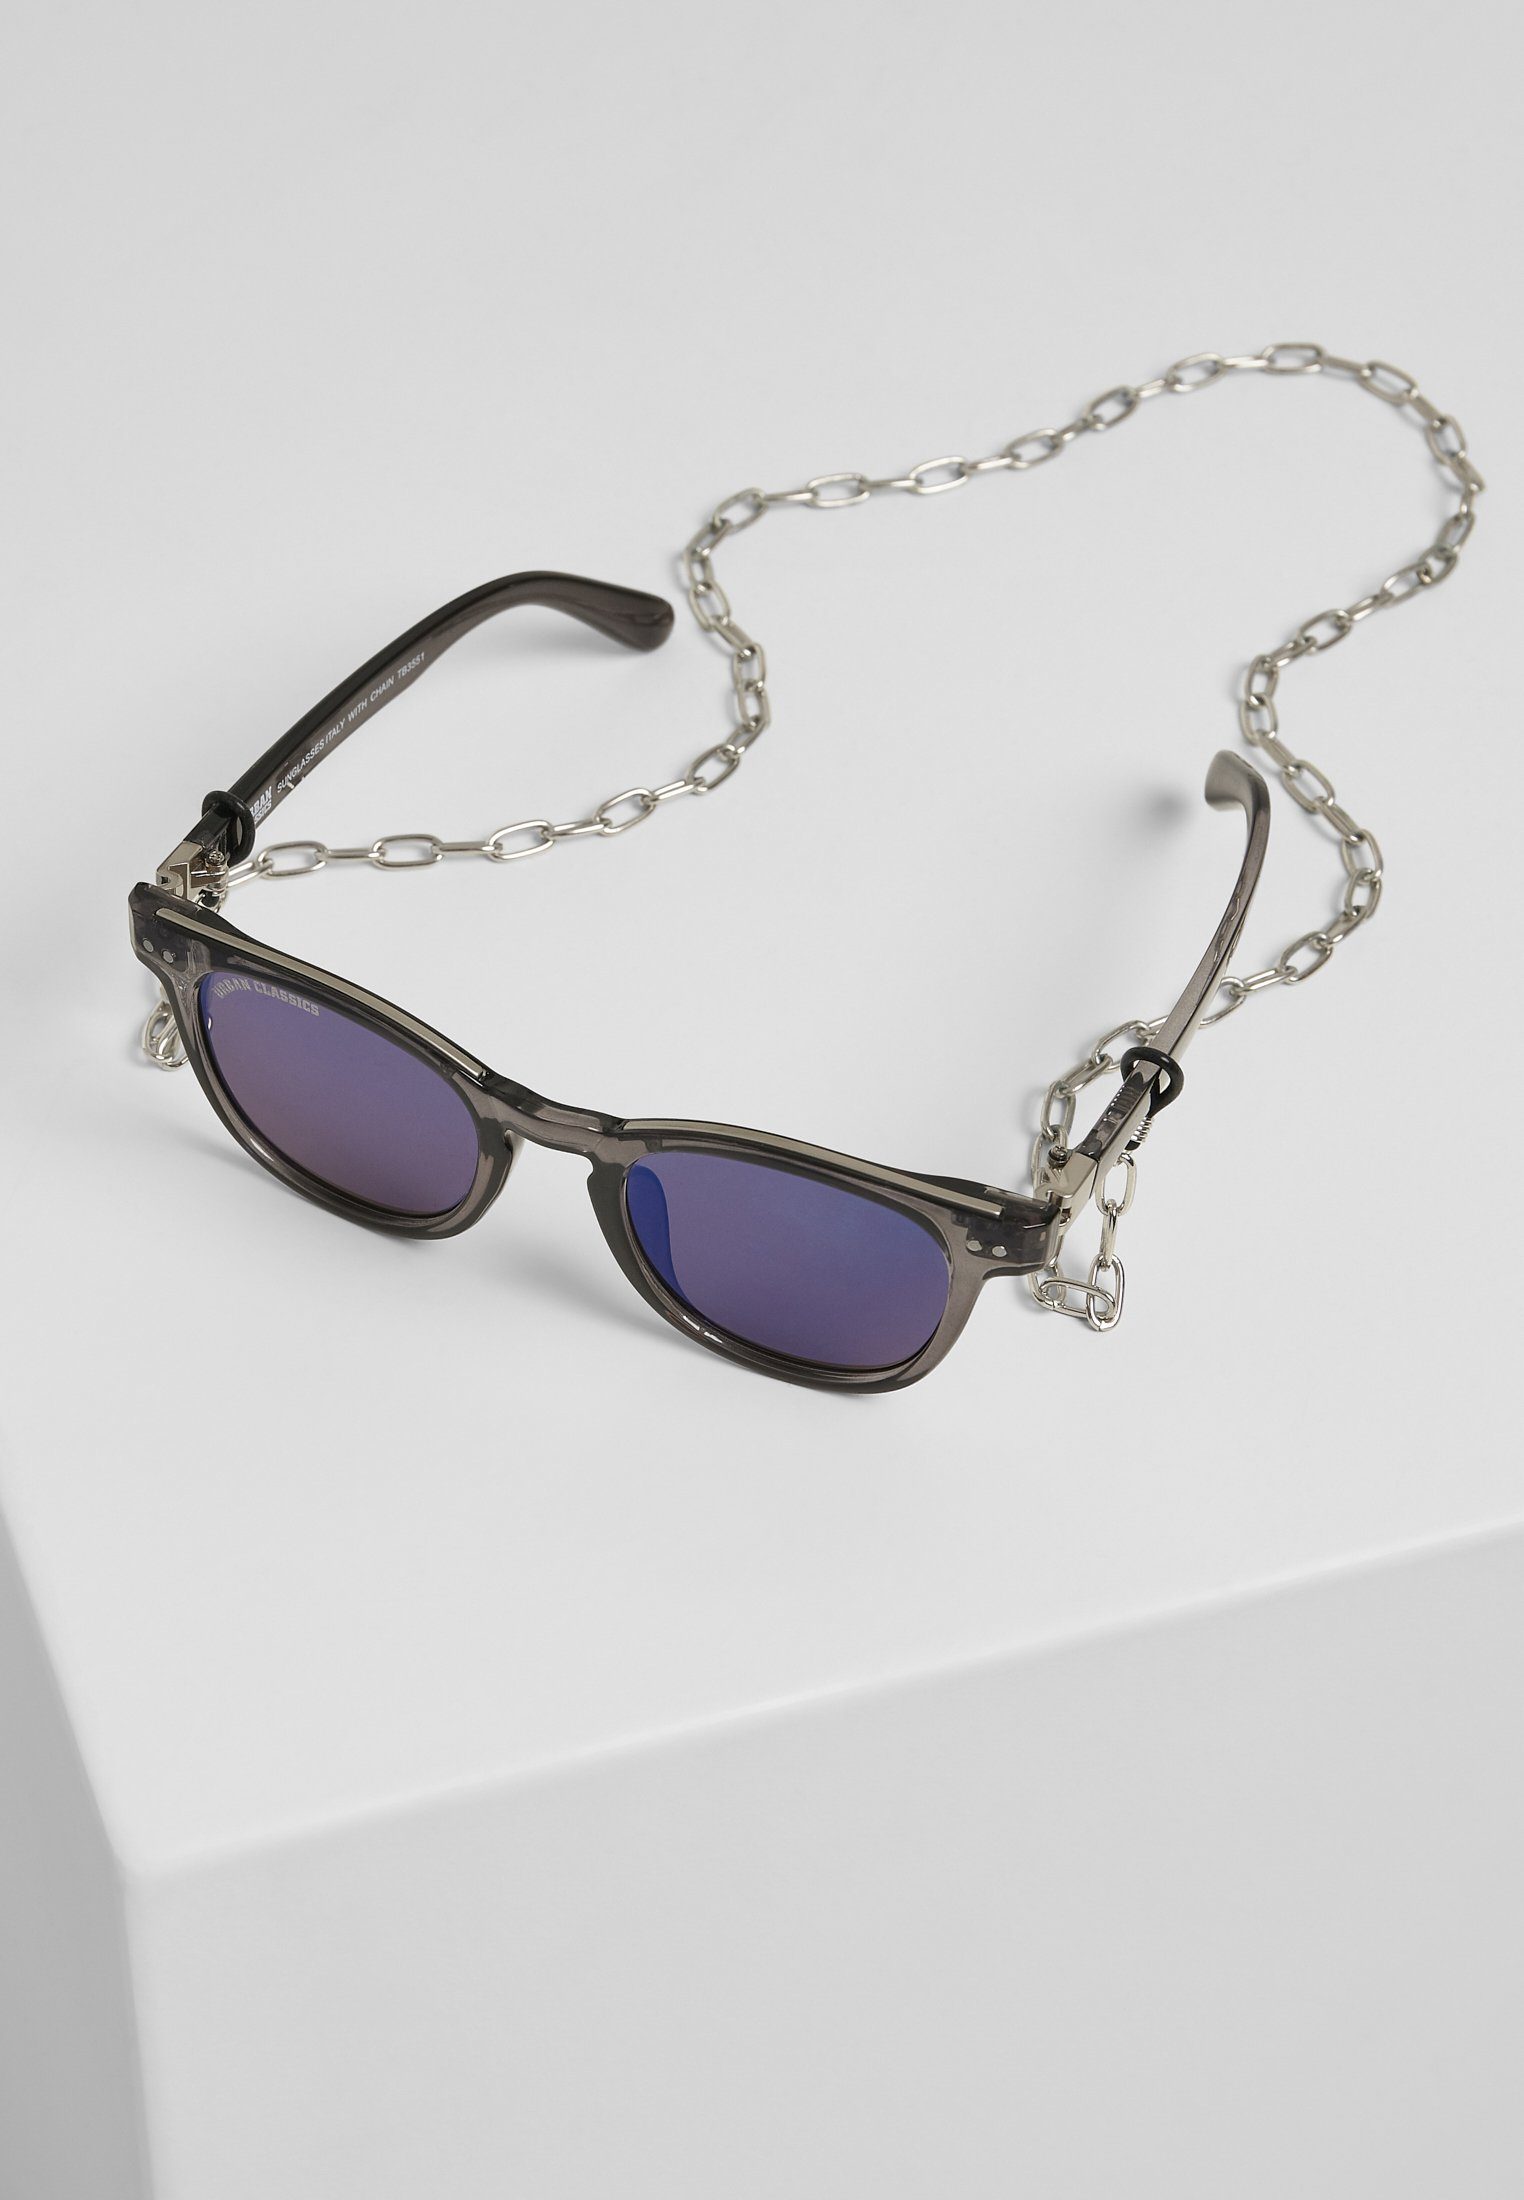 Unisex Italy chain Sonnenbrille URBAN grey/silver/silver with Sunglasses CLASSICS